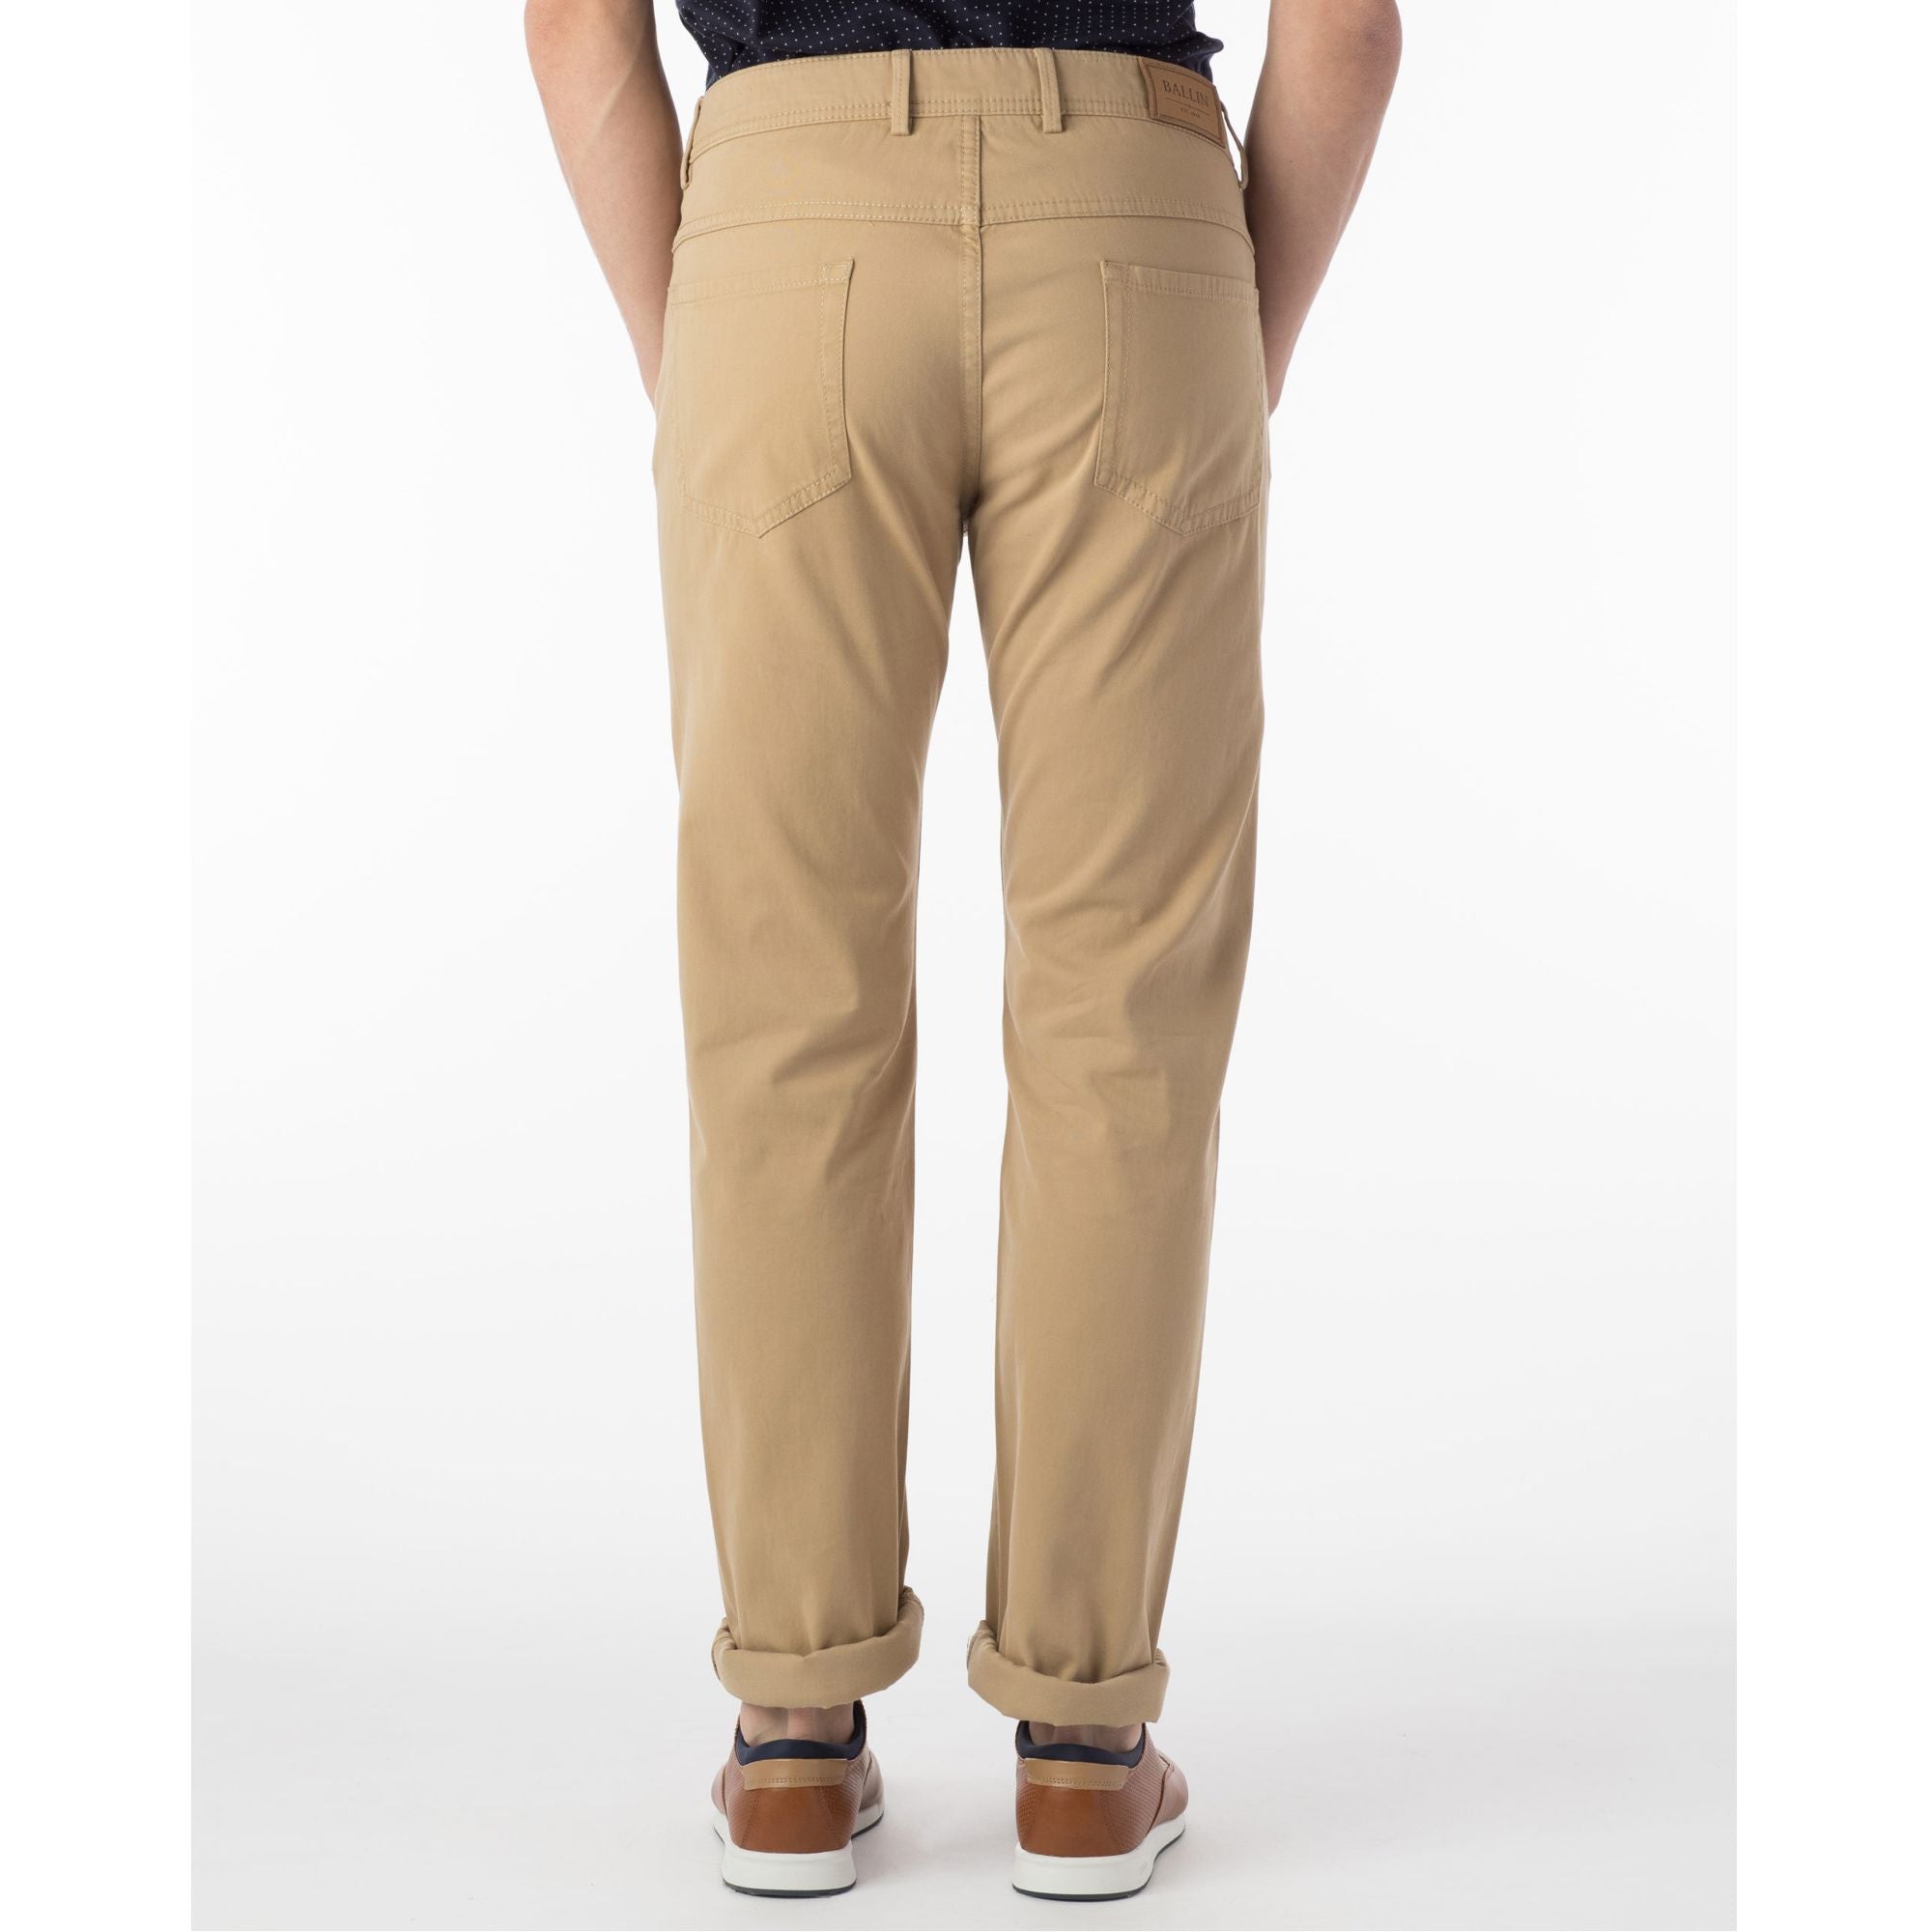 Perma Color Pima Twill 5-Pocket Pants in Khaki (Crescent Modern Fit) by Ballin